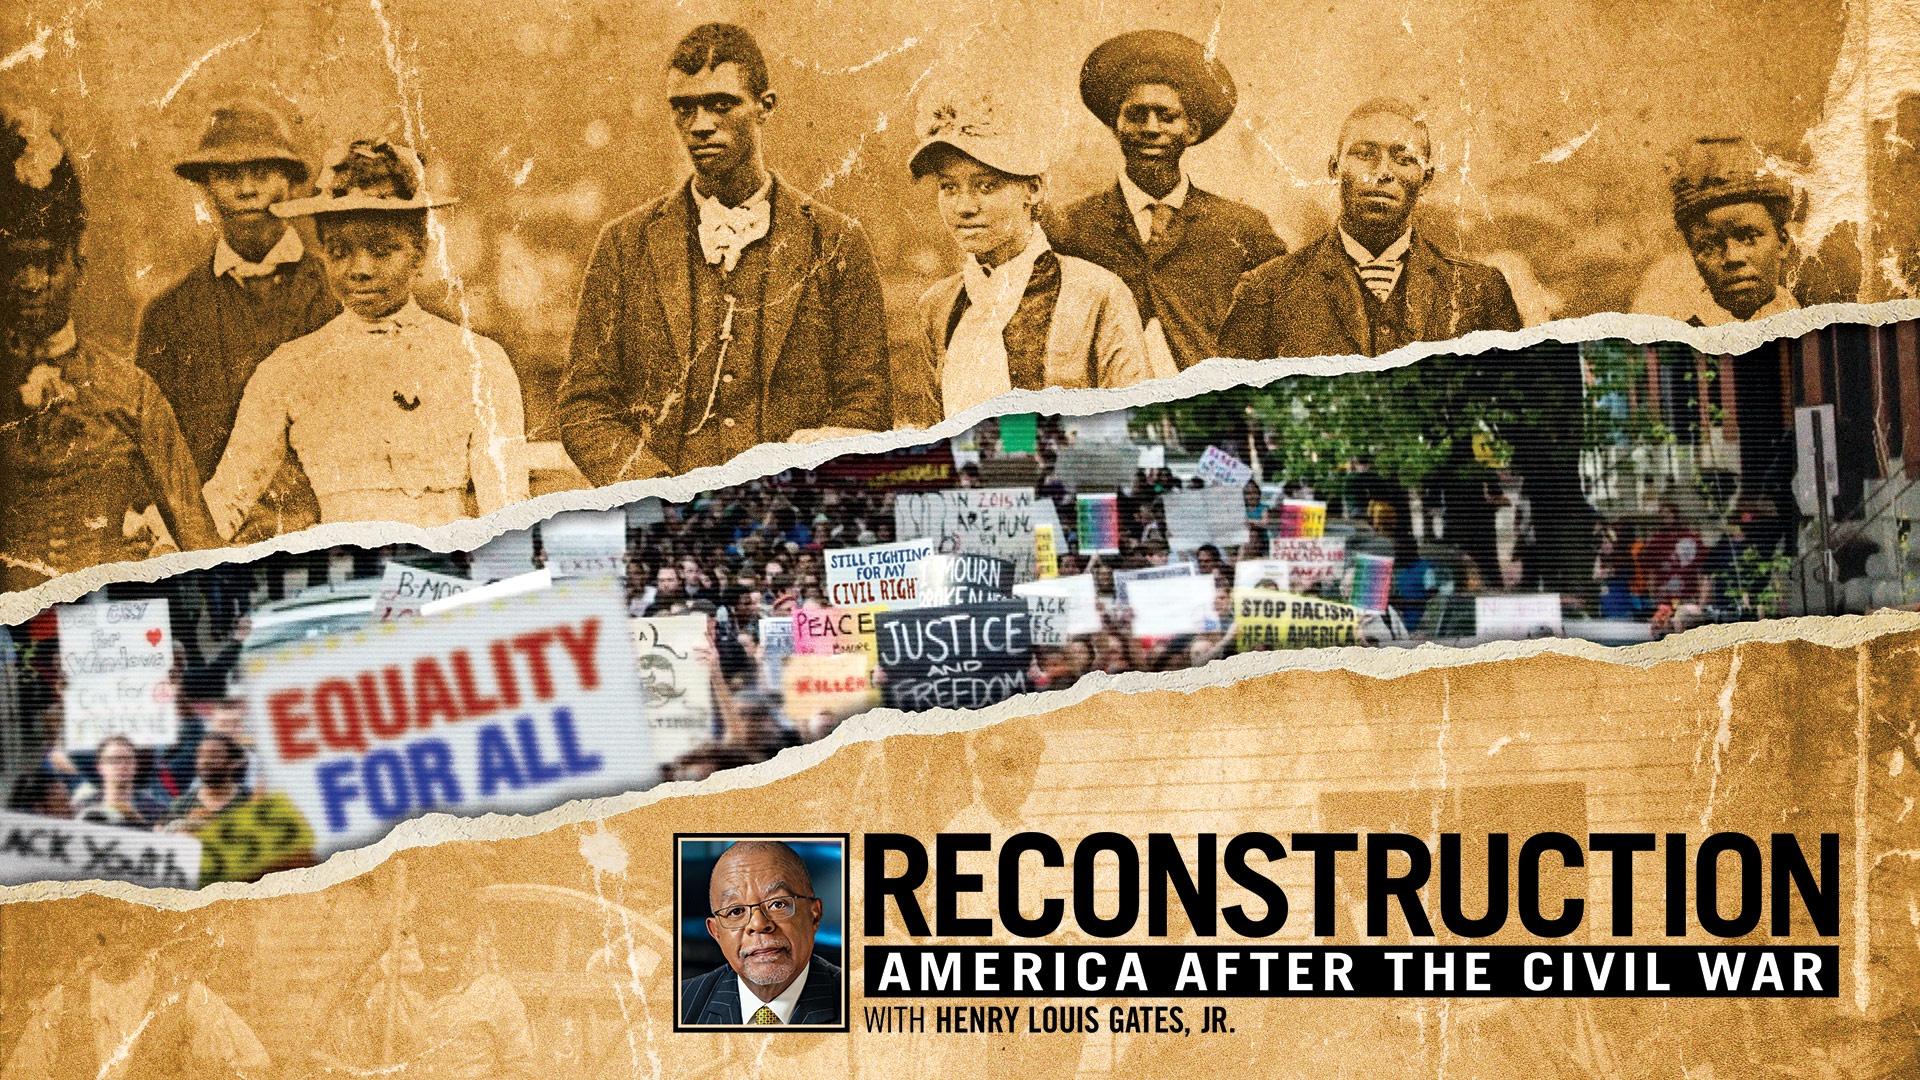 RECONSTRUCTION: AMERICA AFTER THE CIVIL WAR